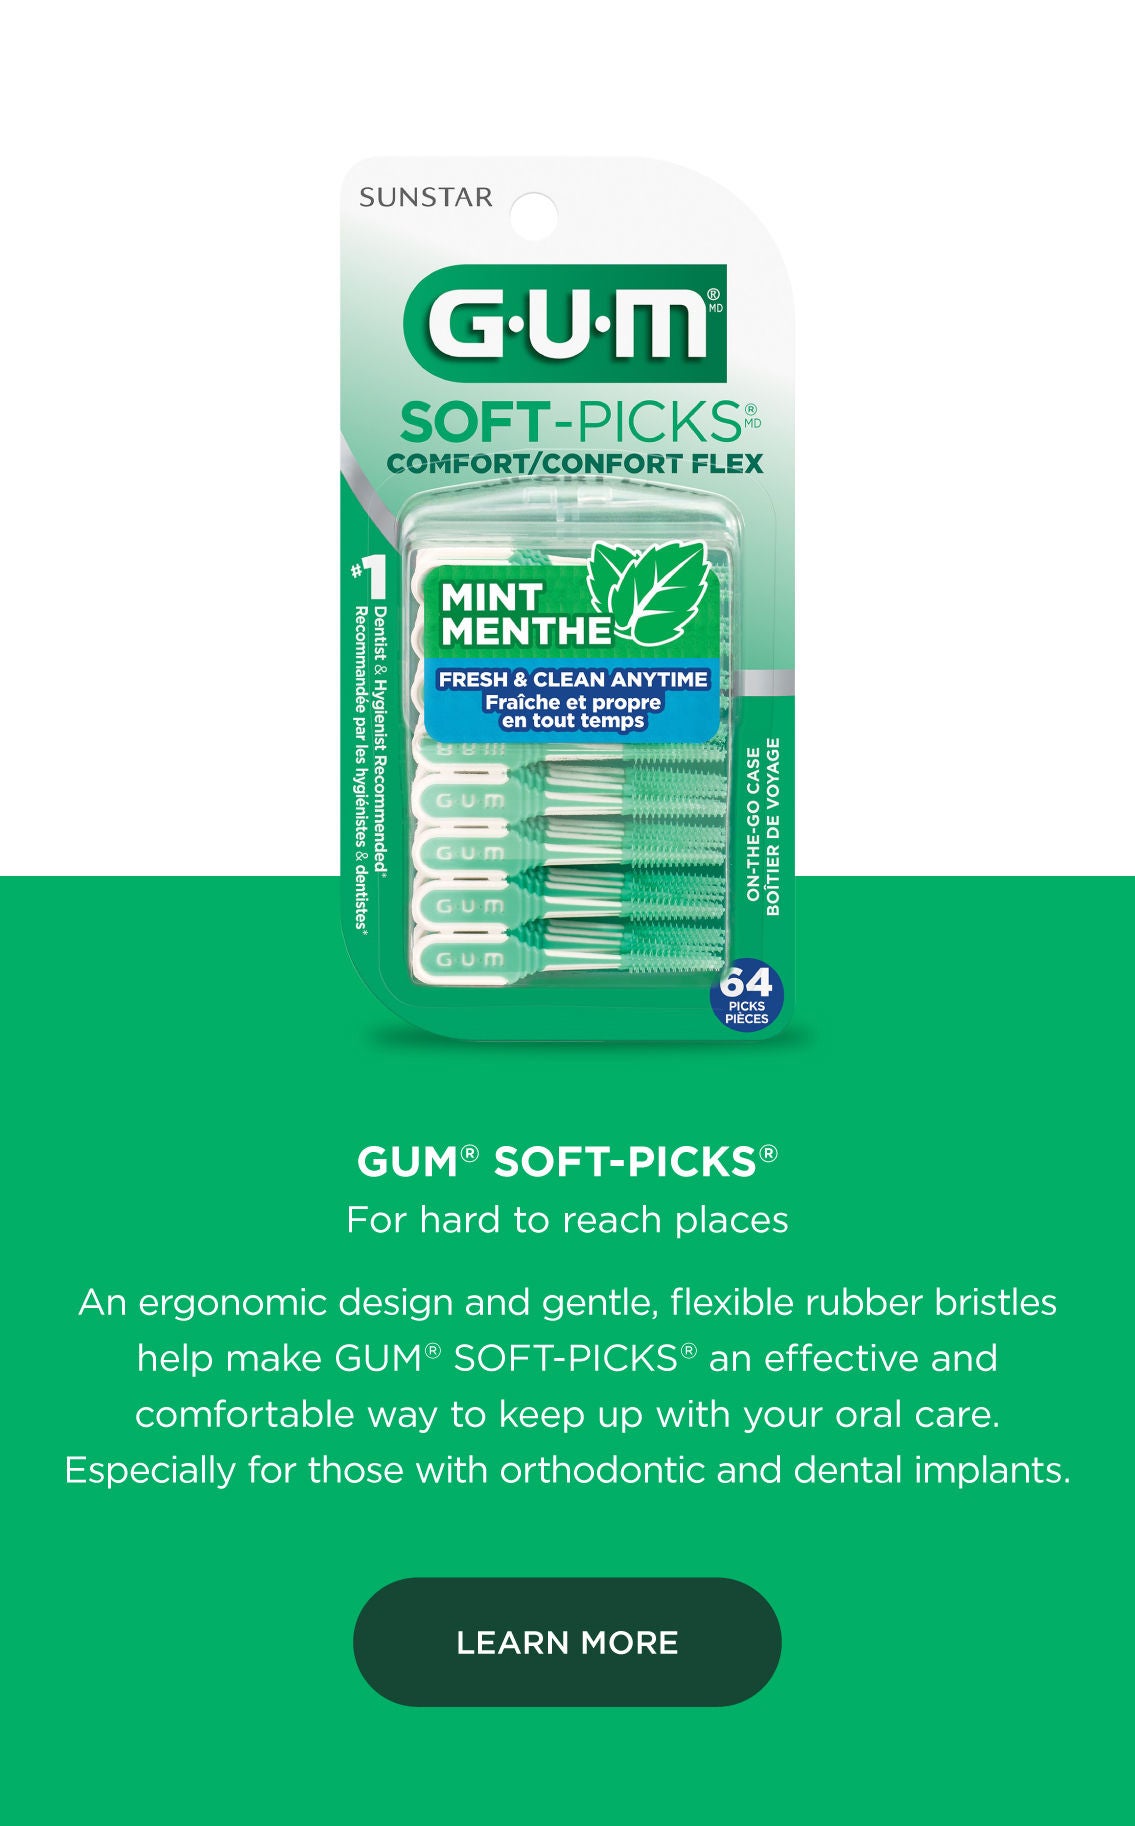 GUM Soft Picks For hard to reach places An ergonomic design and gentle, flexible rubber bristles help make GUM soft picks an effective and comfortable way to keep up with your oral care. Especially for those with orthodontic and dental implants. LEARN MORE